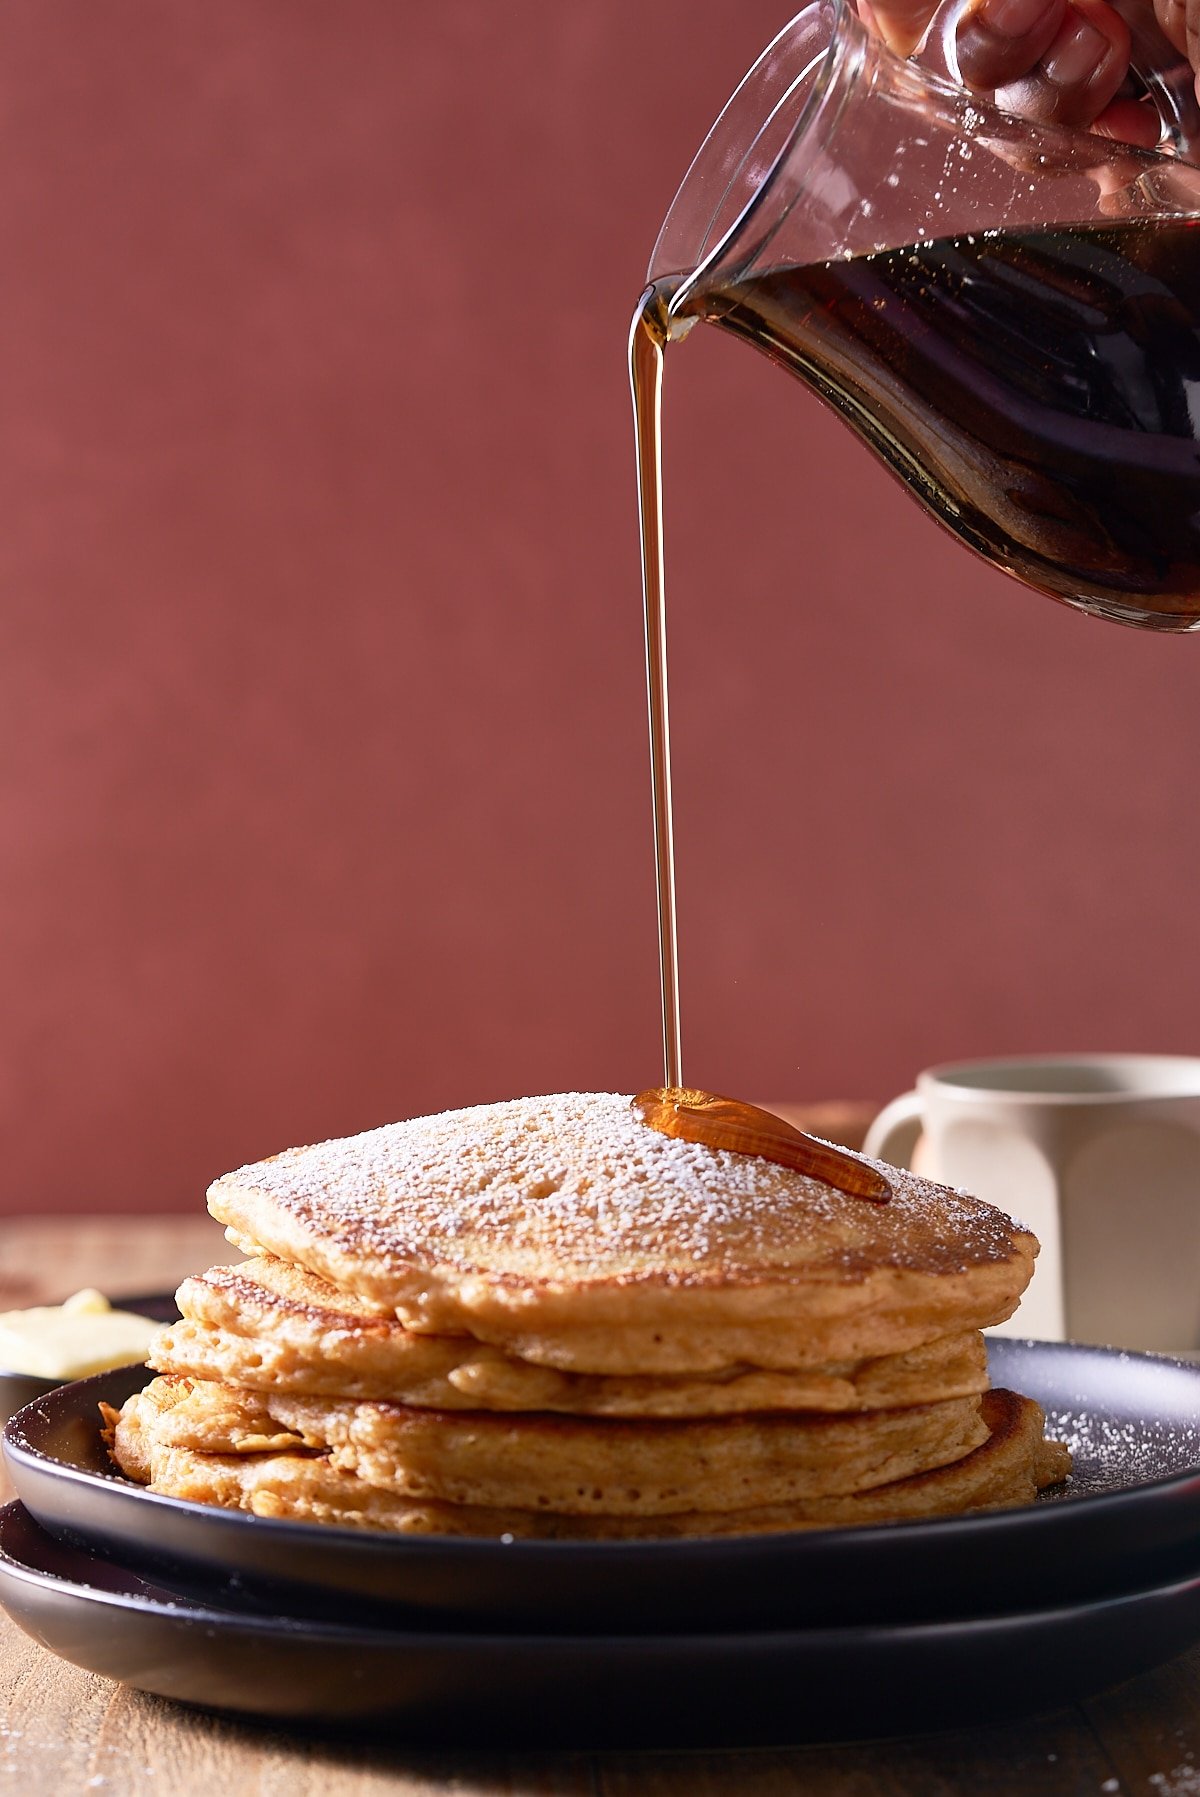 A stack of sweet potato pancakes with a jug of maple syrup being poured over.